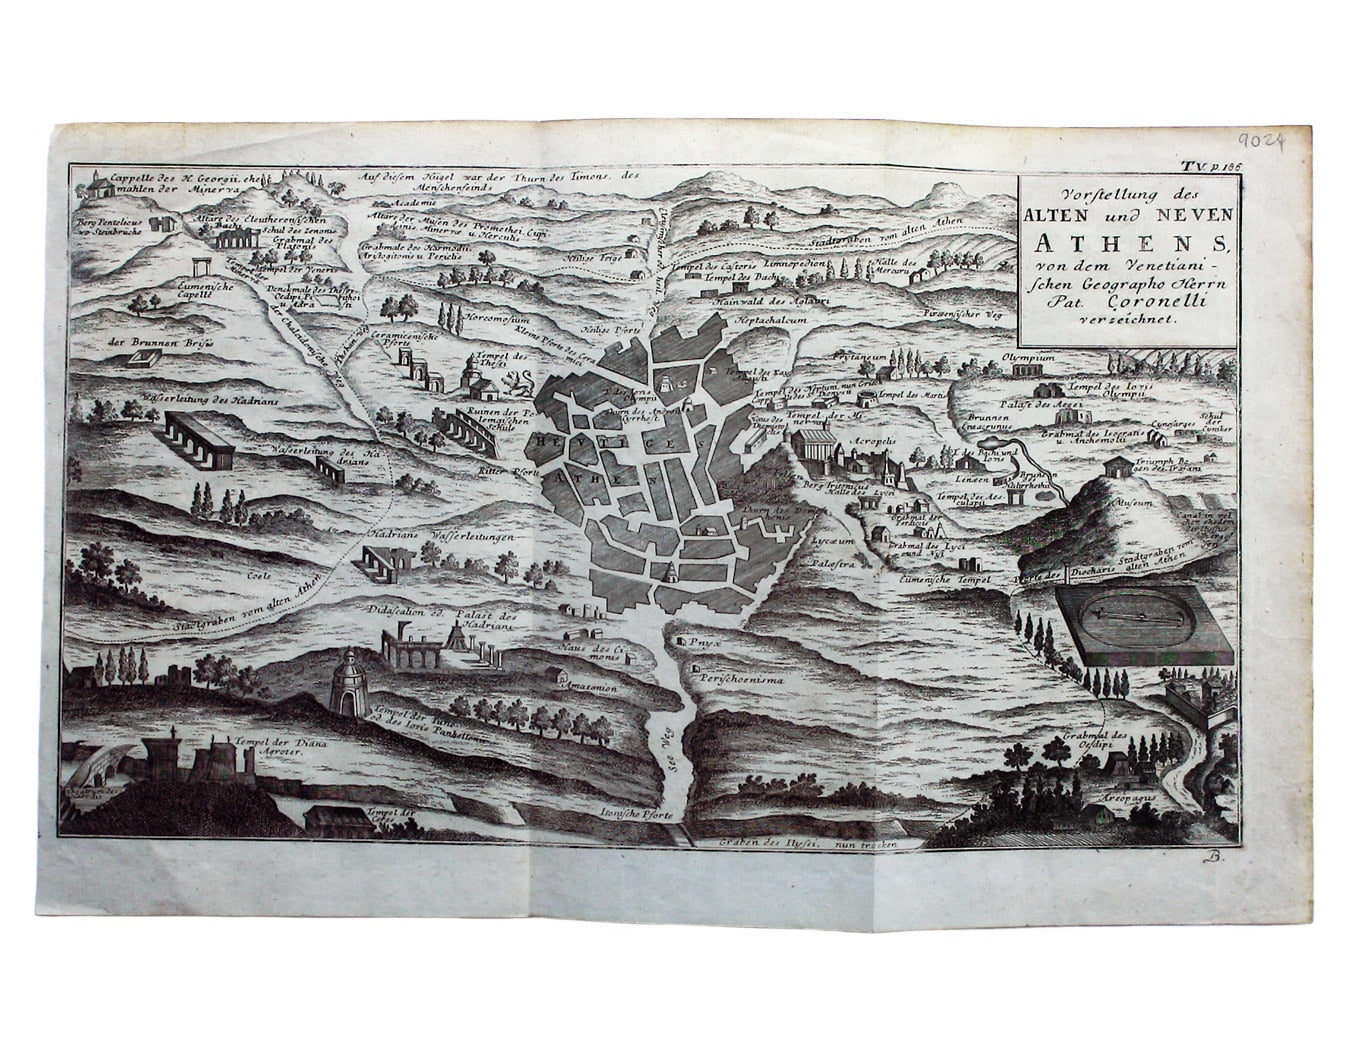 Coronelli’s Map of Athens, a German Edition